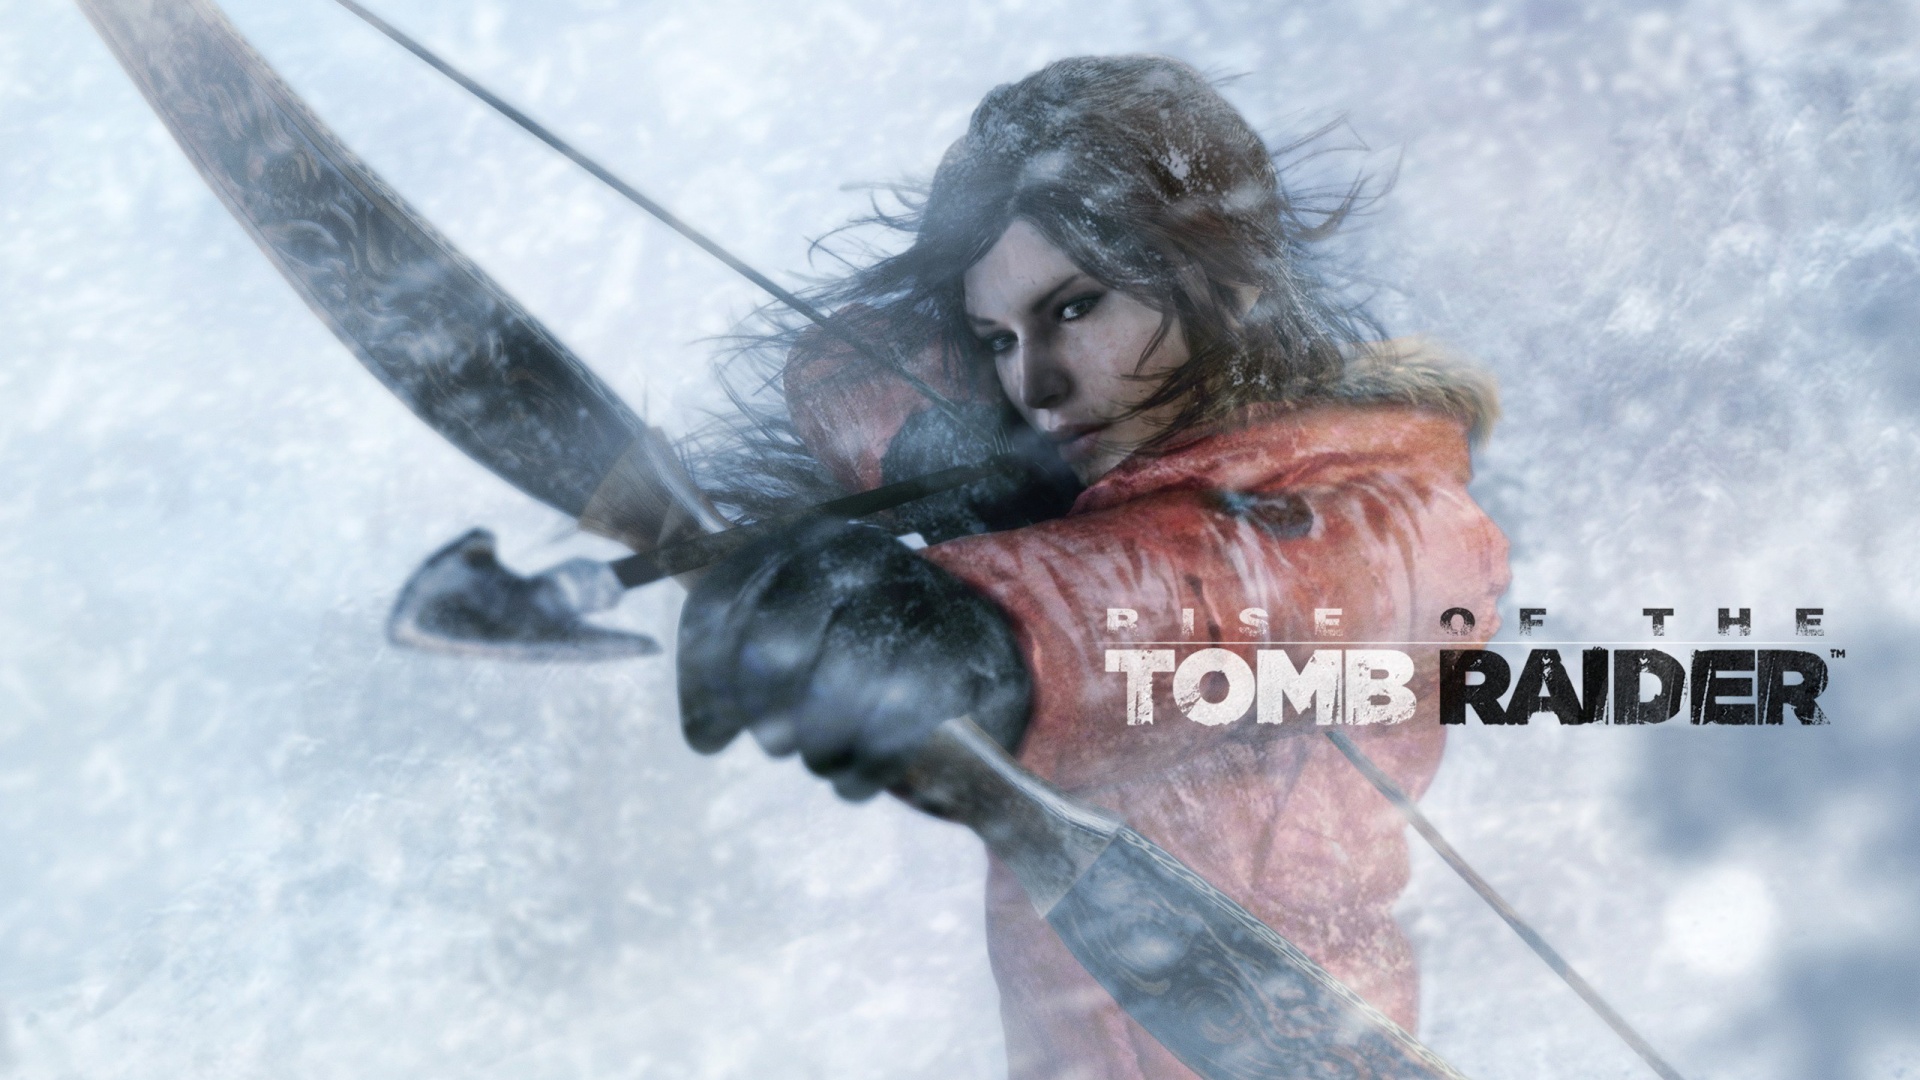 Download 1920x1080 HD Wallpaper rise of the tomb raider blizzard